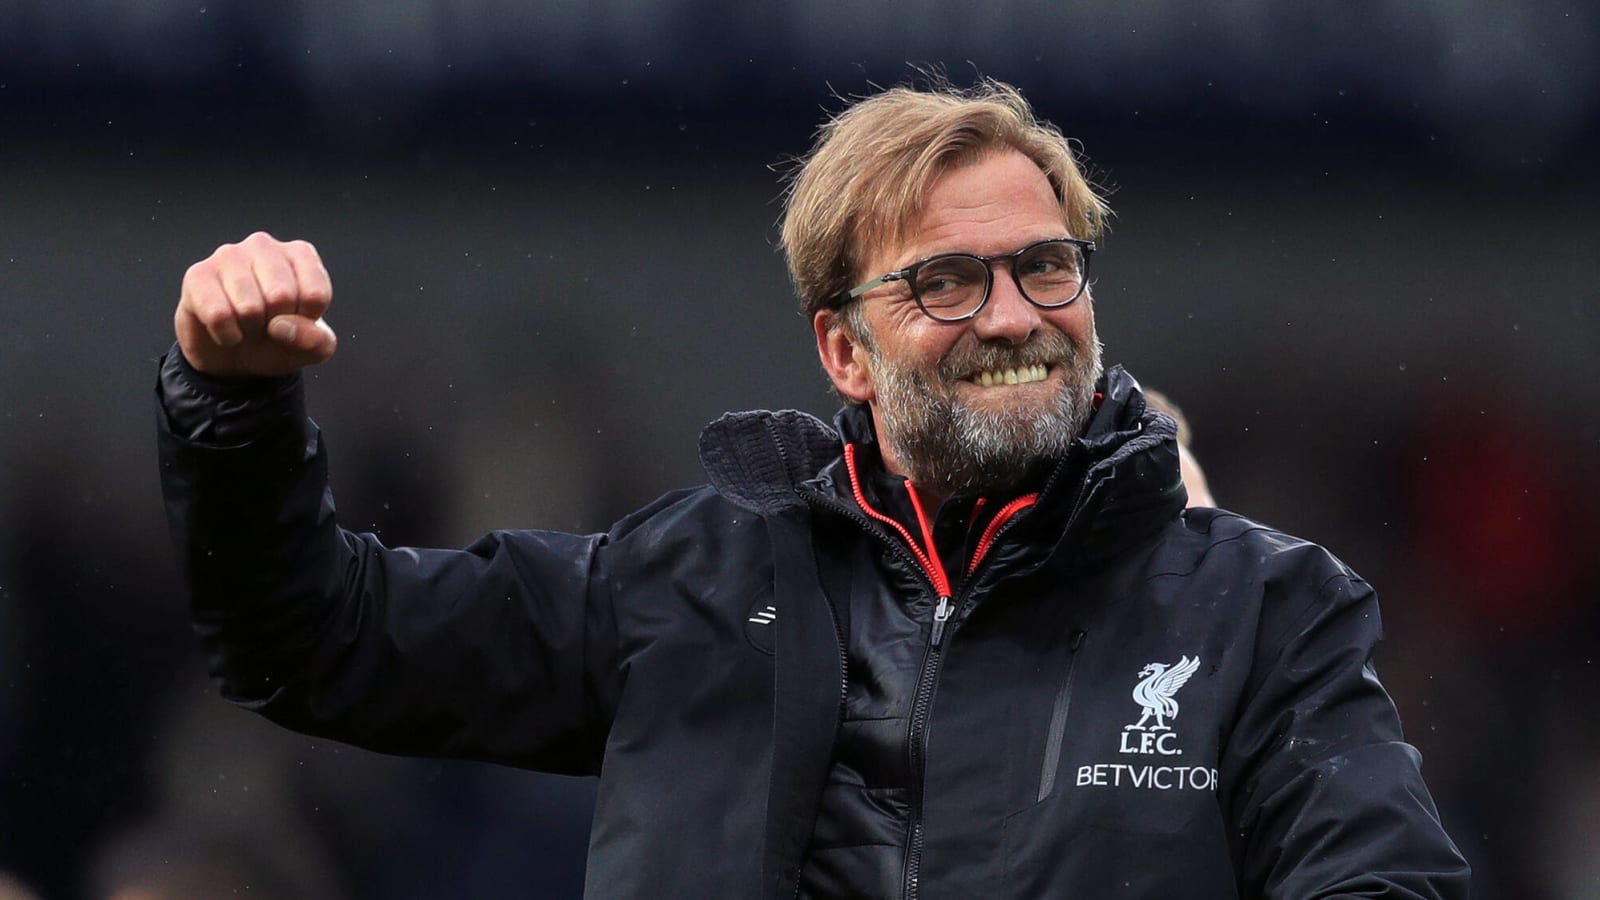 Klopp at Liverpool, Season 9: LFC 2.0, an unwanted January jolt and the end of an epic Anfield era